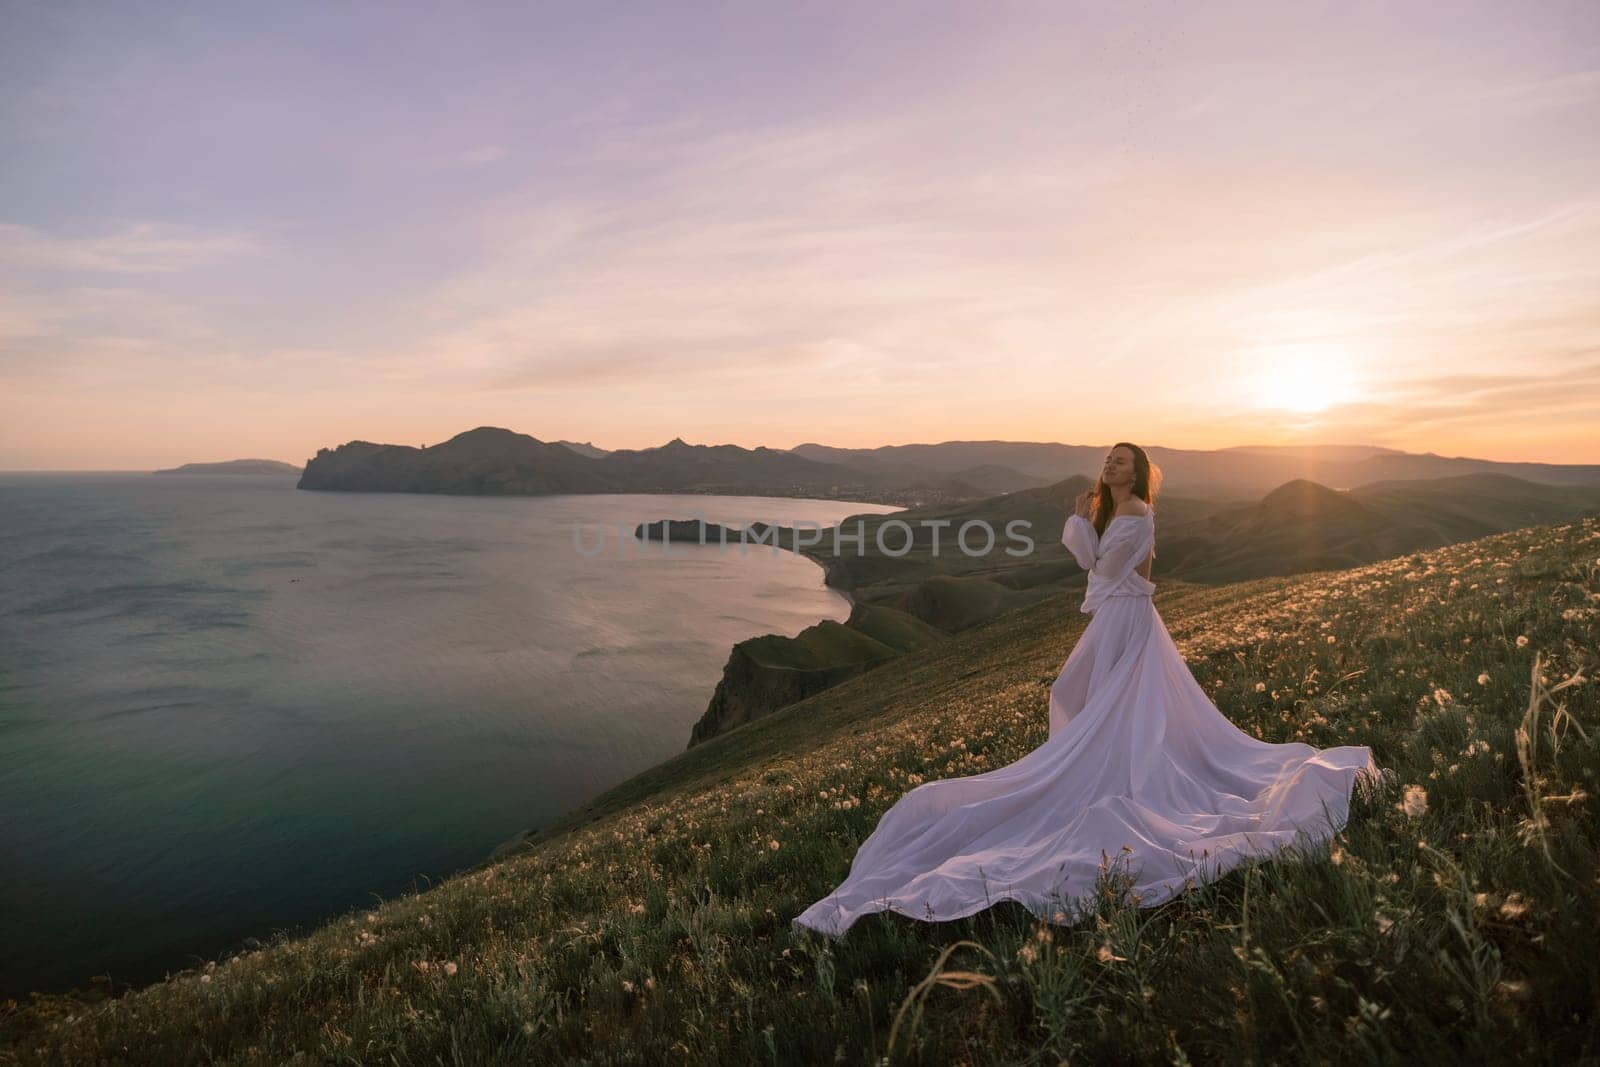 A woman in a white dress stands on a hill overlooking a body of water. The scene is serene and peaceful, with the sun setting in the background. The woman is lost in thought. by Matiunina